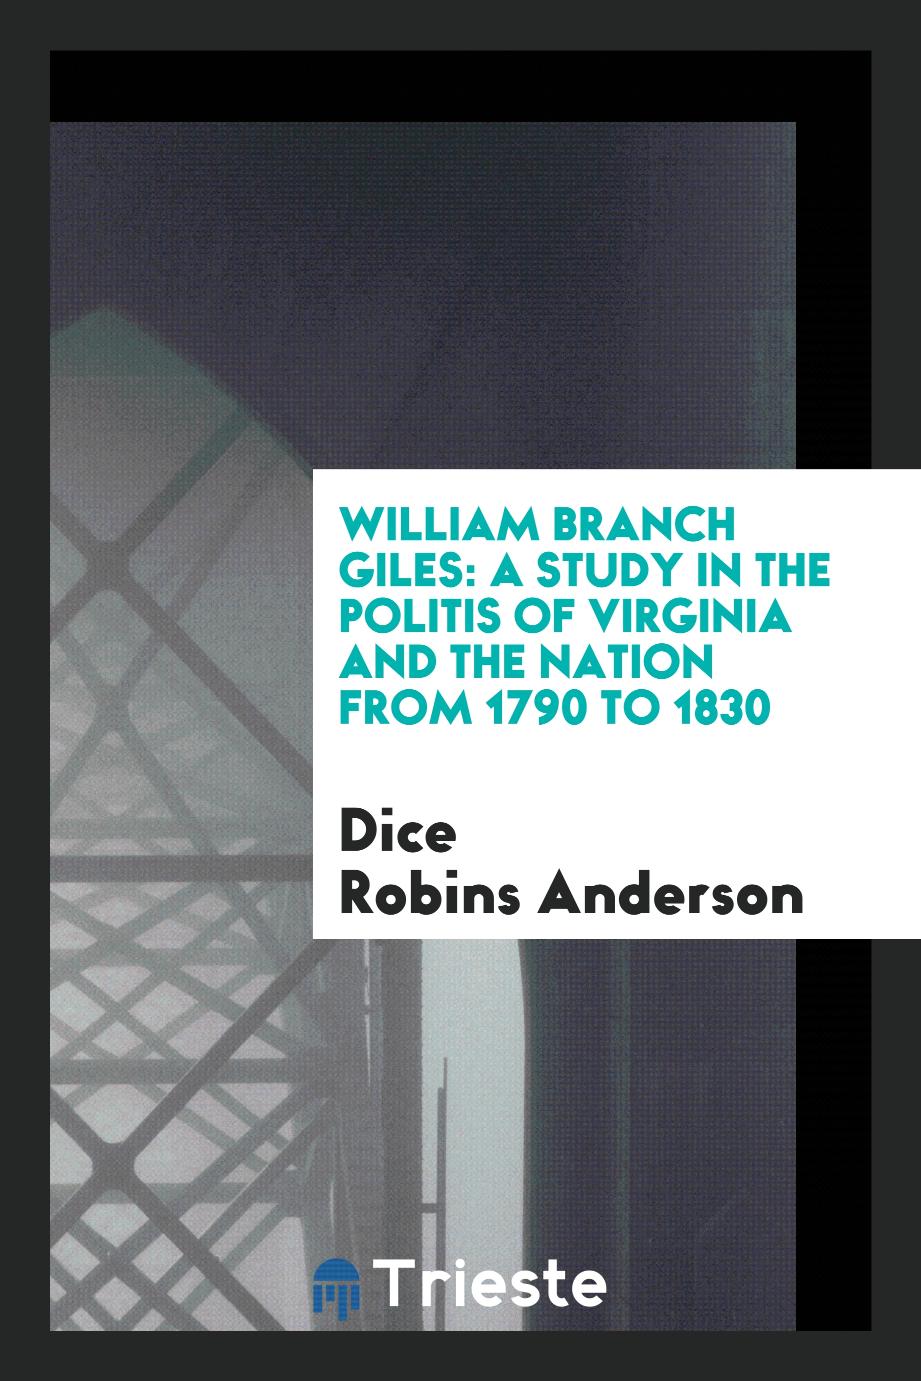 William Branch Giles: a Study in the Politiсs of Virginia and the Nation from 1790 to 1830